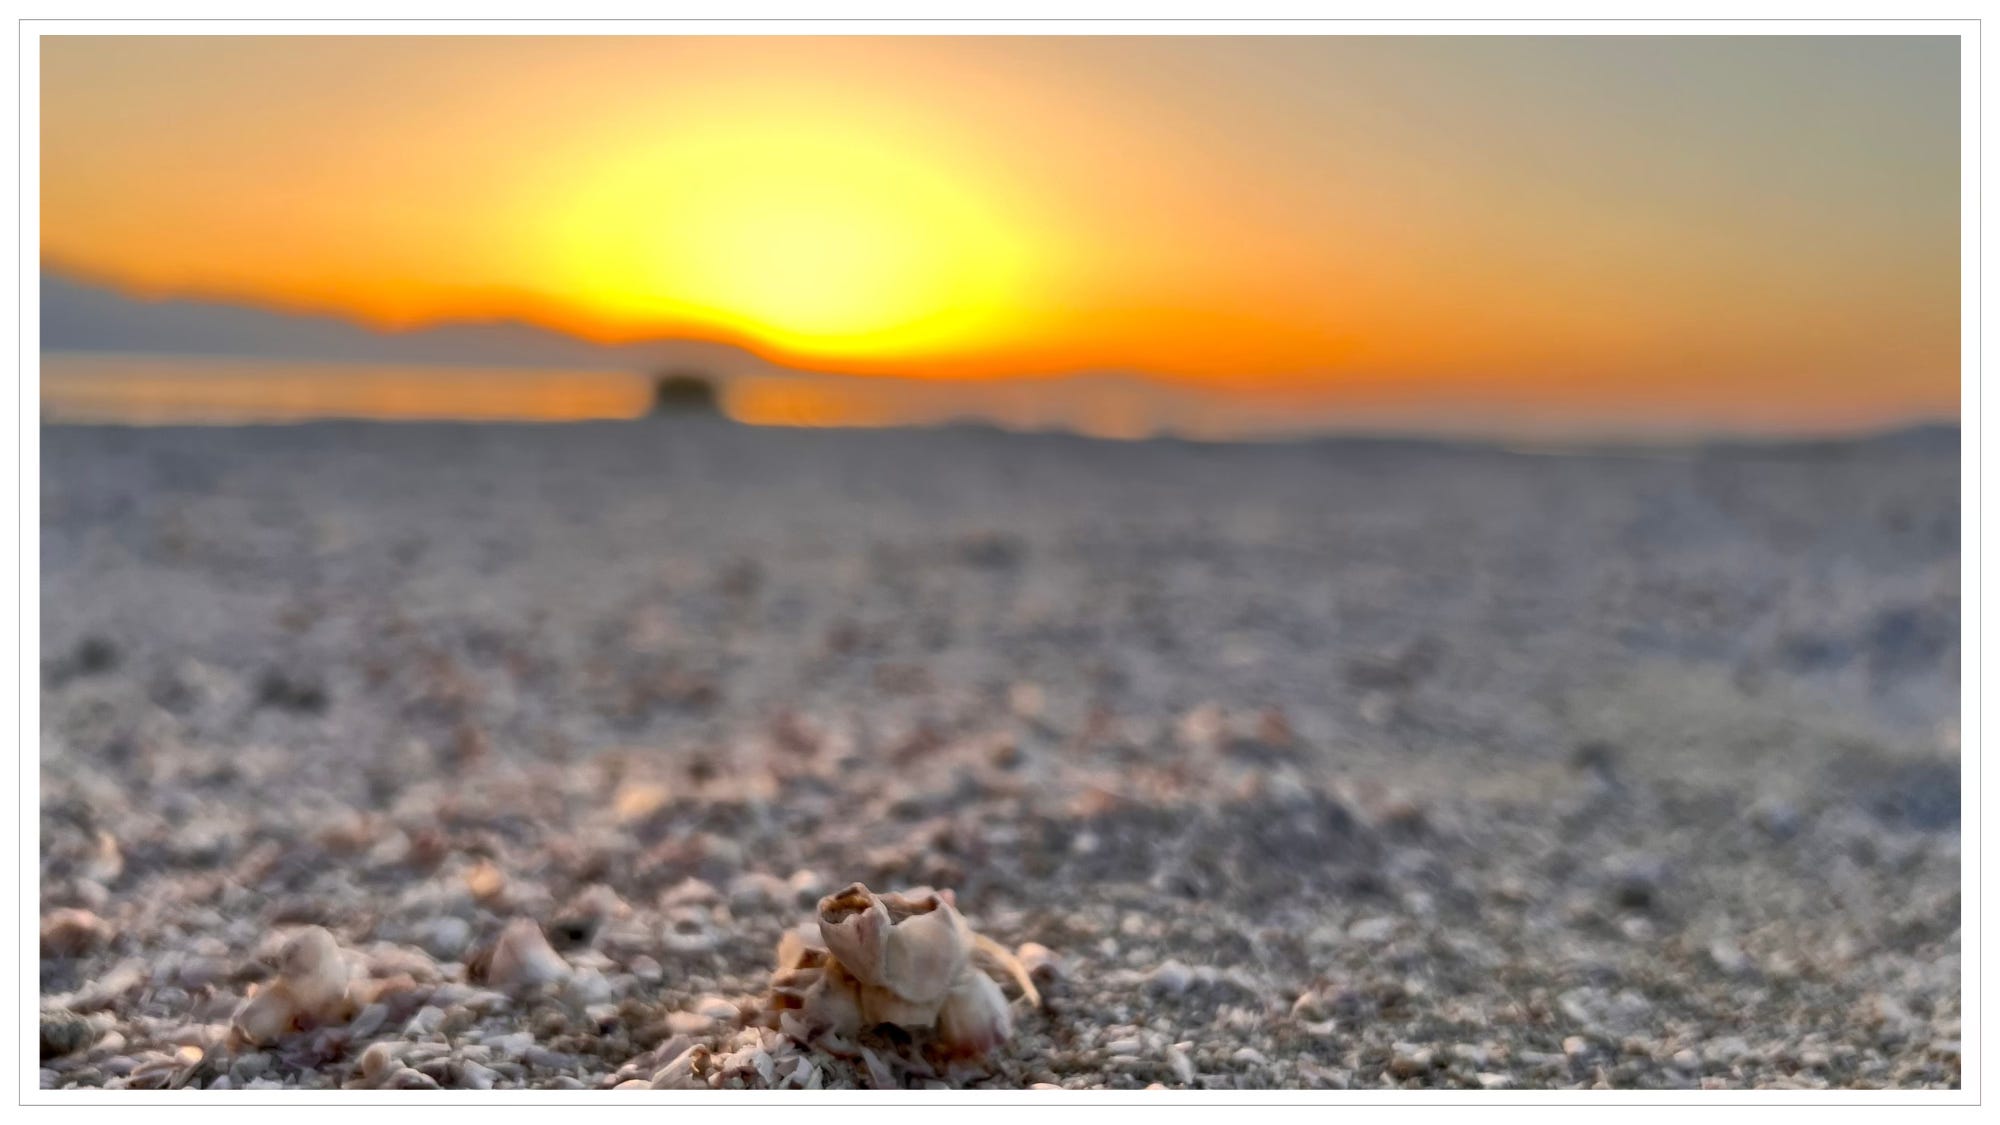 ground covered in fractured fish skeletons, sunset in the distance: Salton Sea